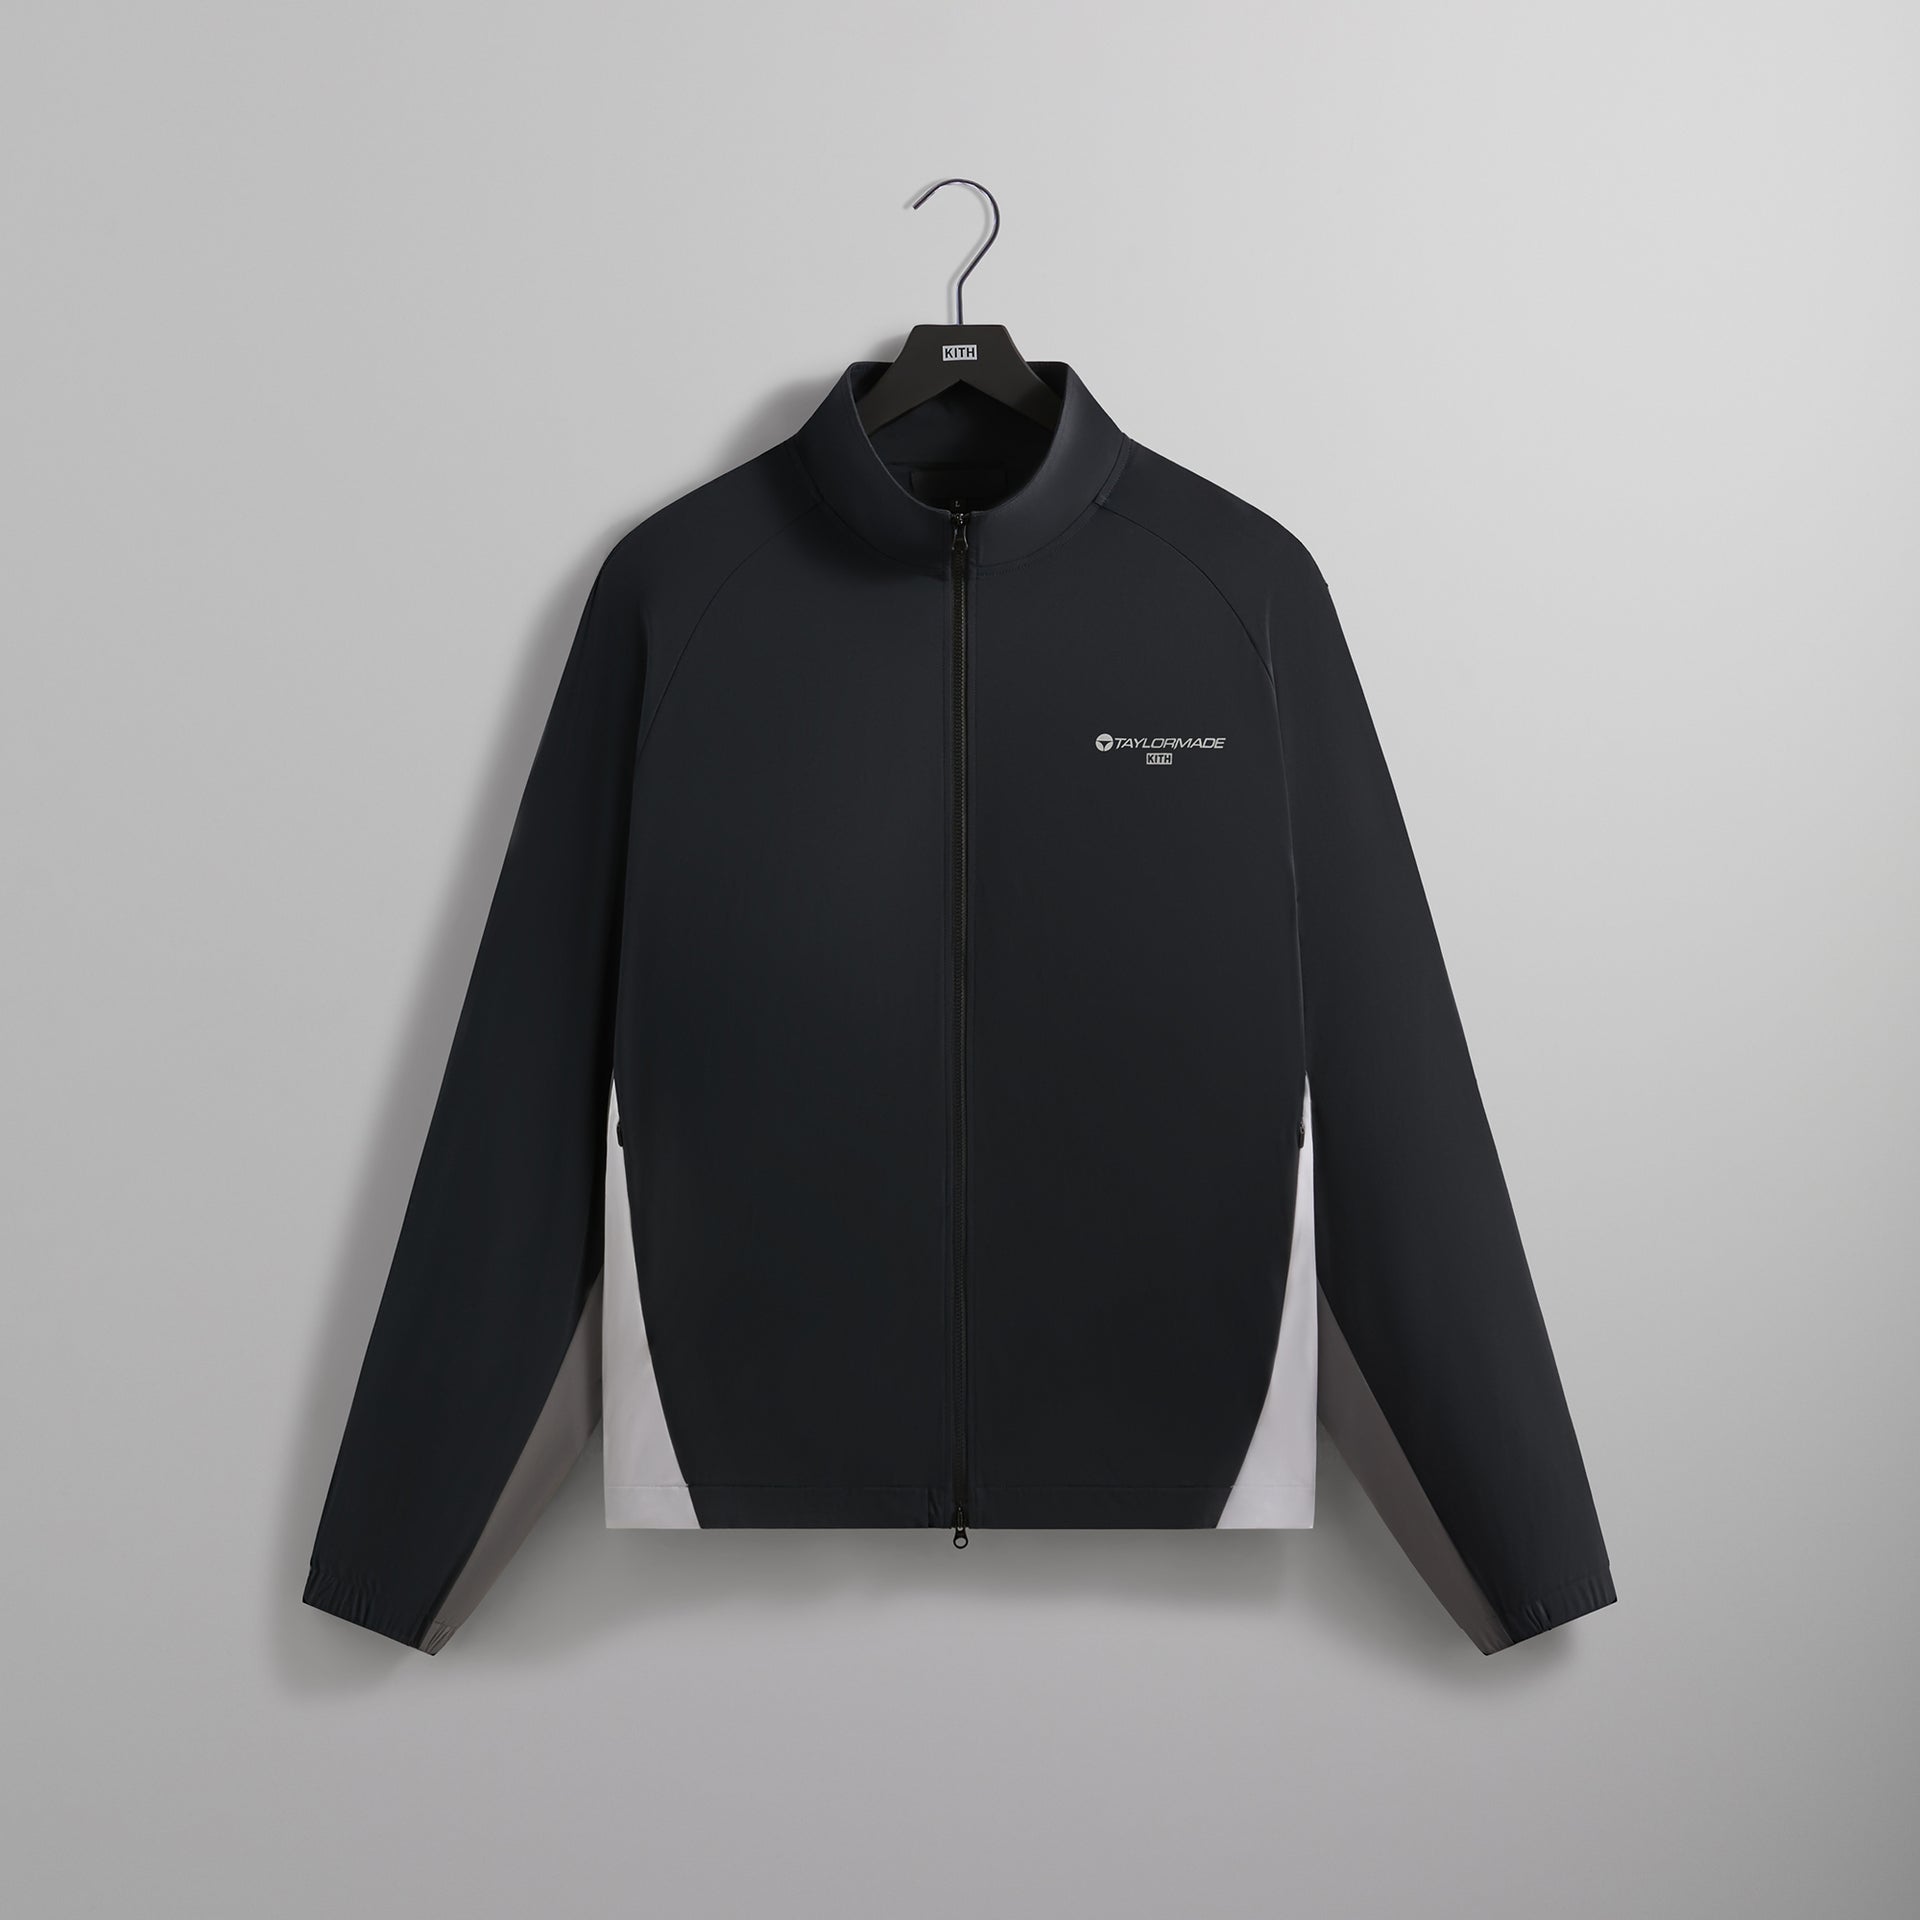 Kith for TaylorMade Long Game Jacket - Black PH